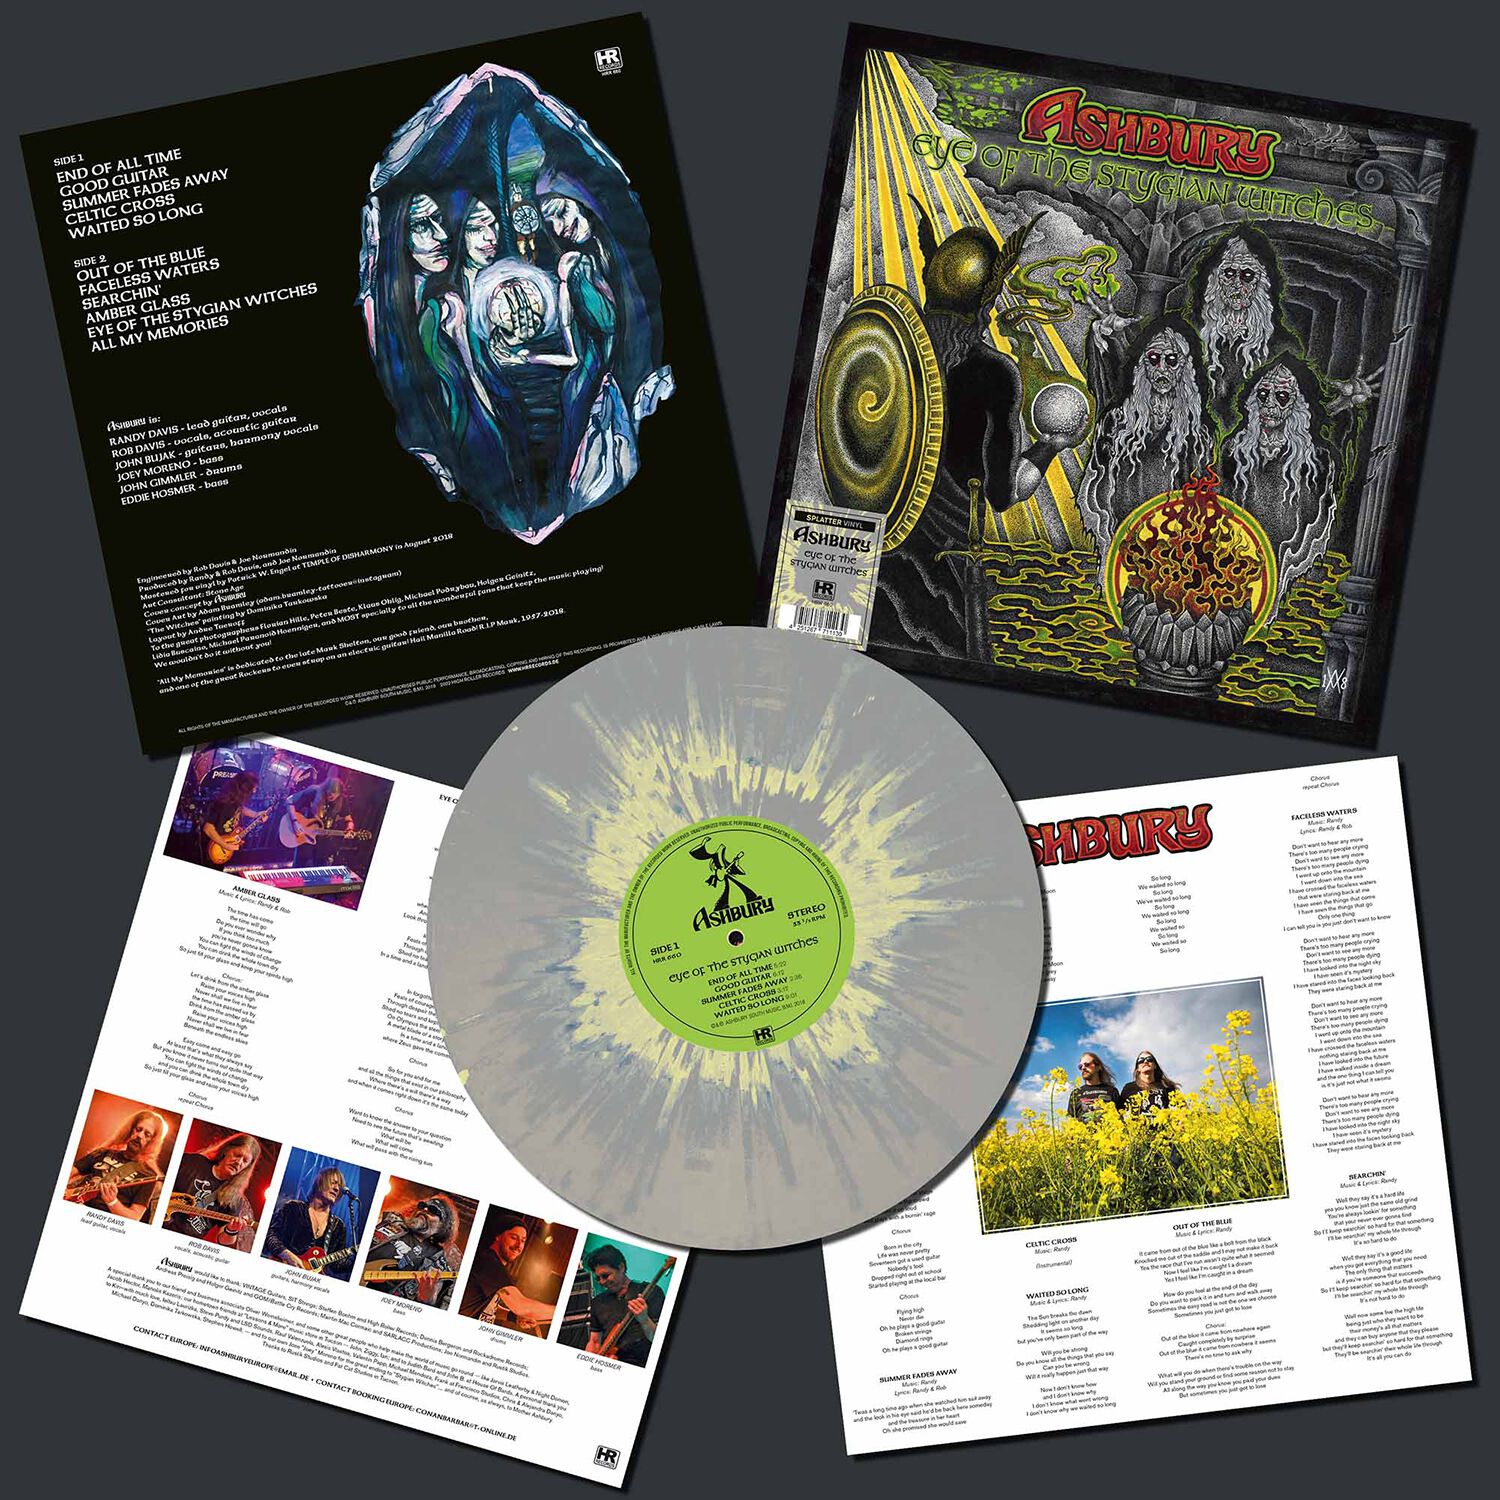 Ashbury Eye of the Stygian Witches LP coloured